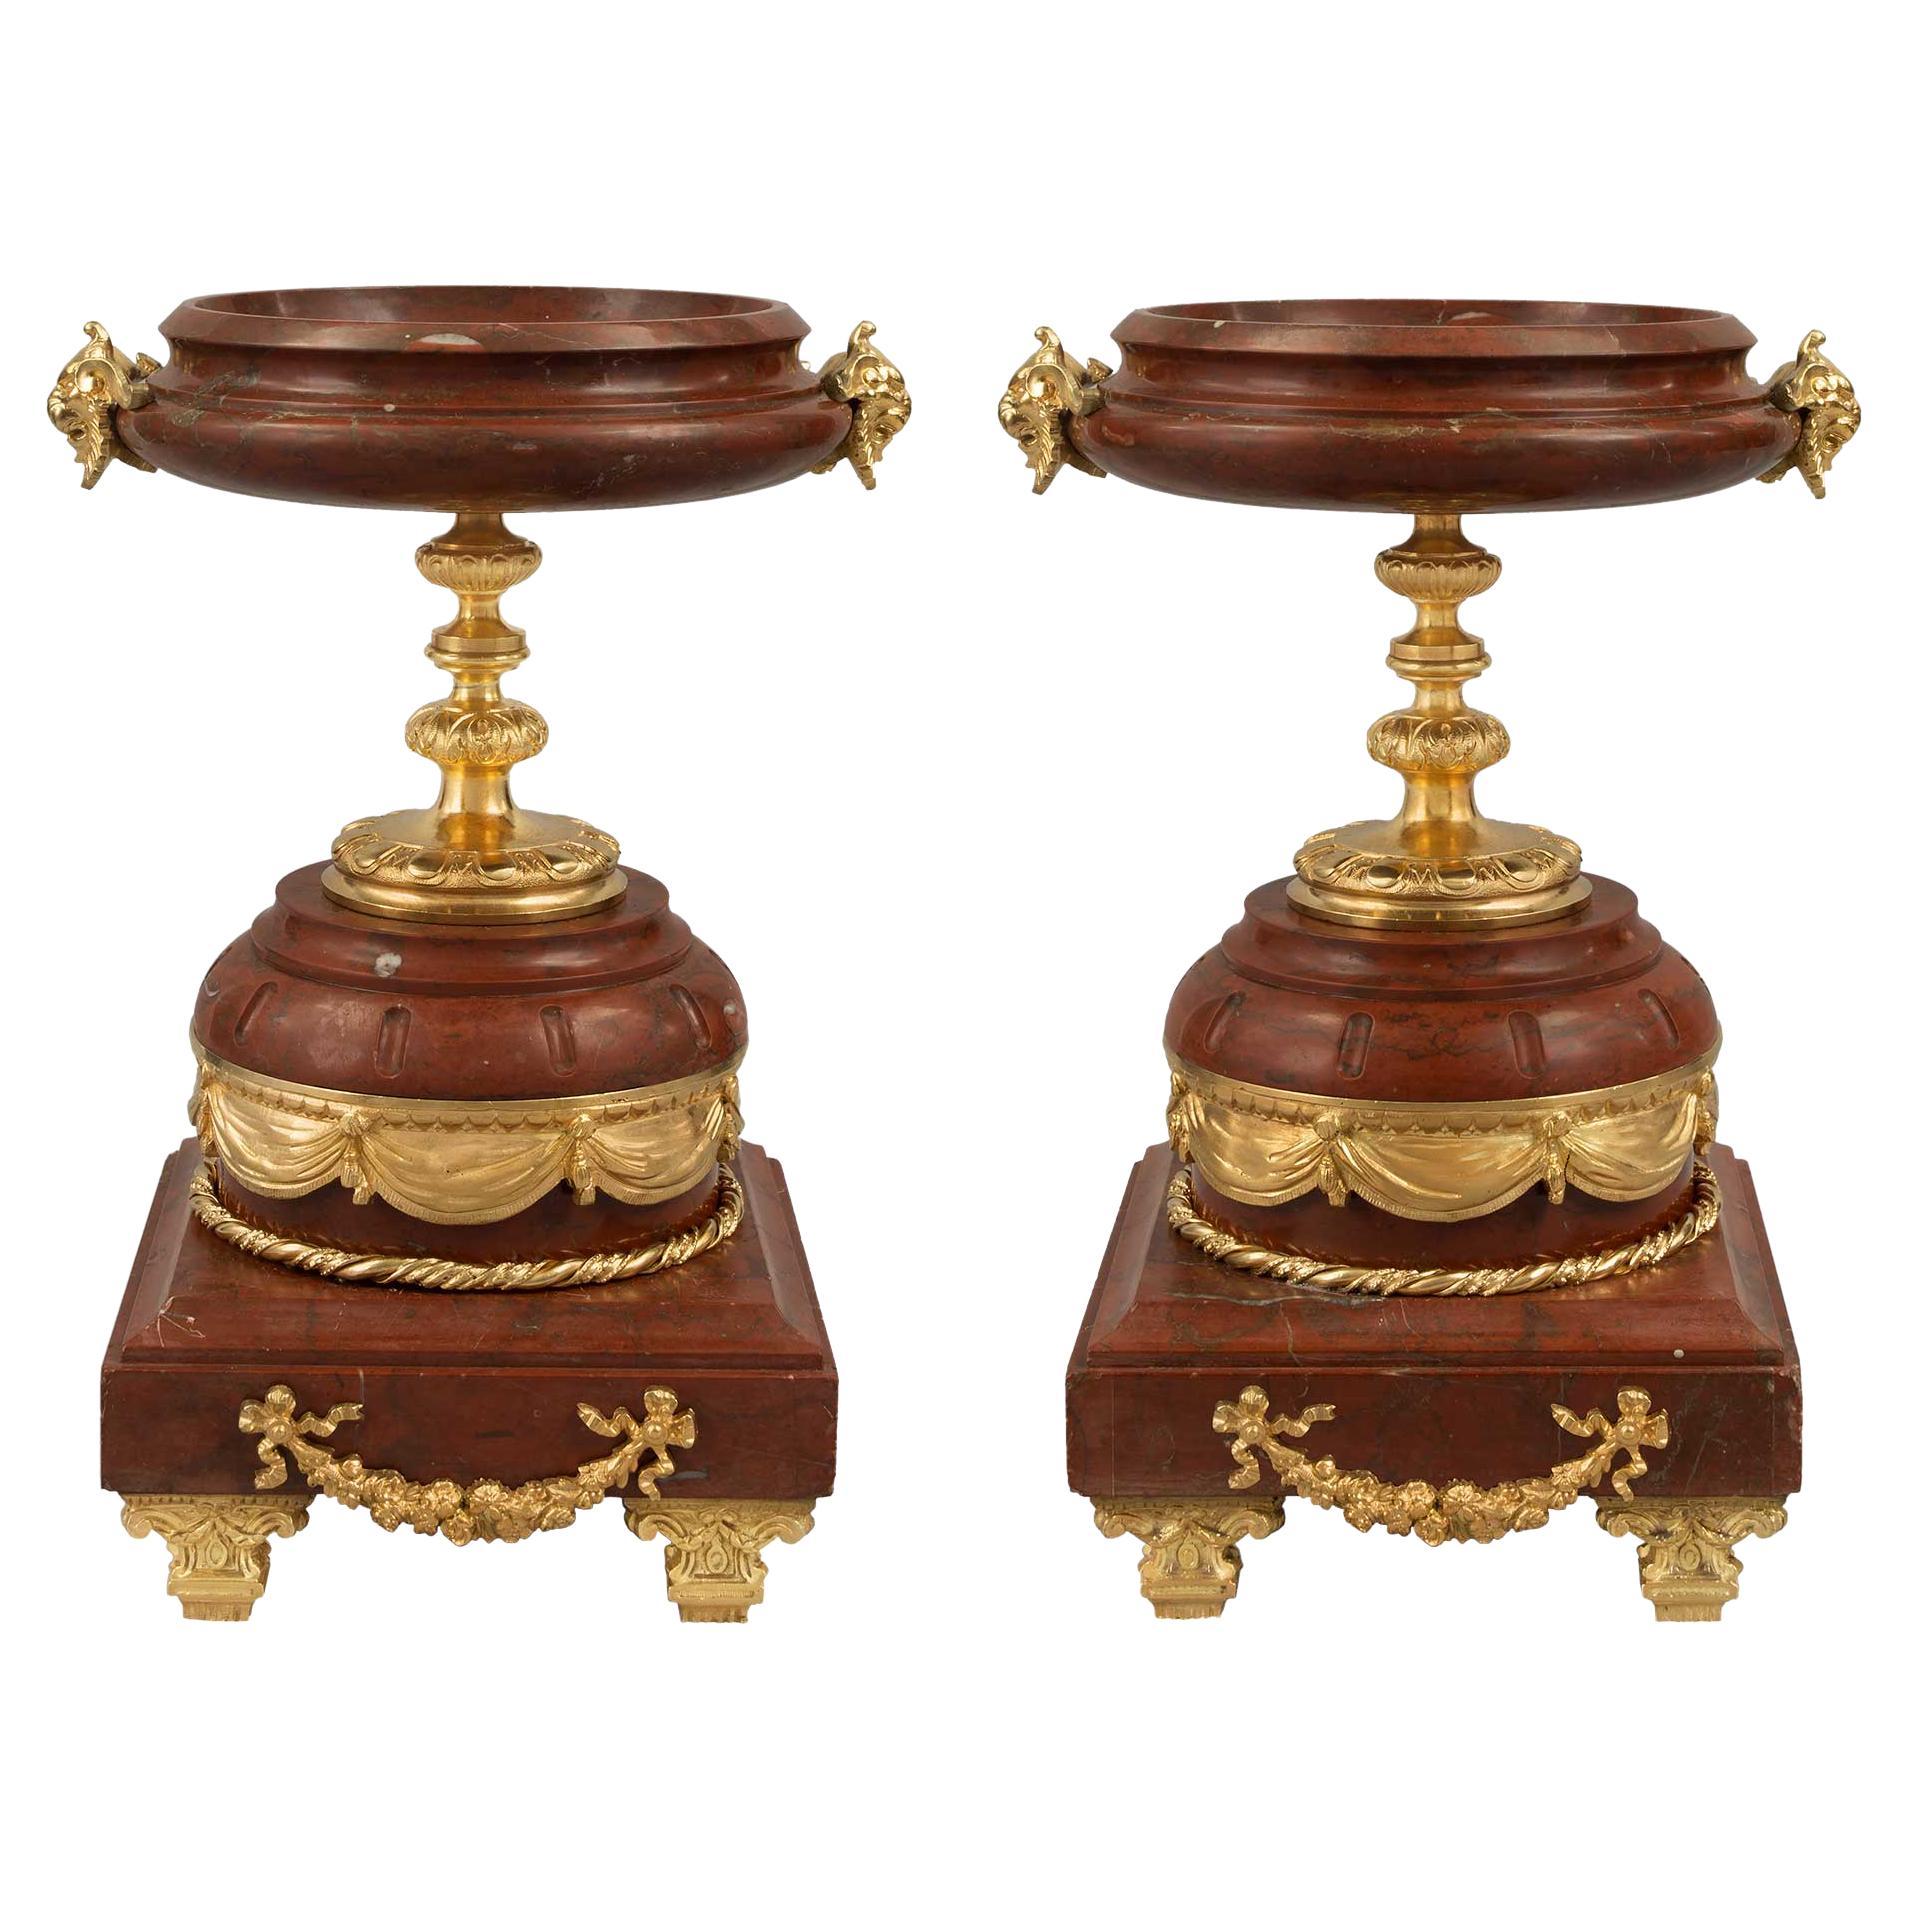 Pair of French Louis XVI Style Mid-19th Century Marble and Ormolu Tazzas For Sale